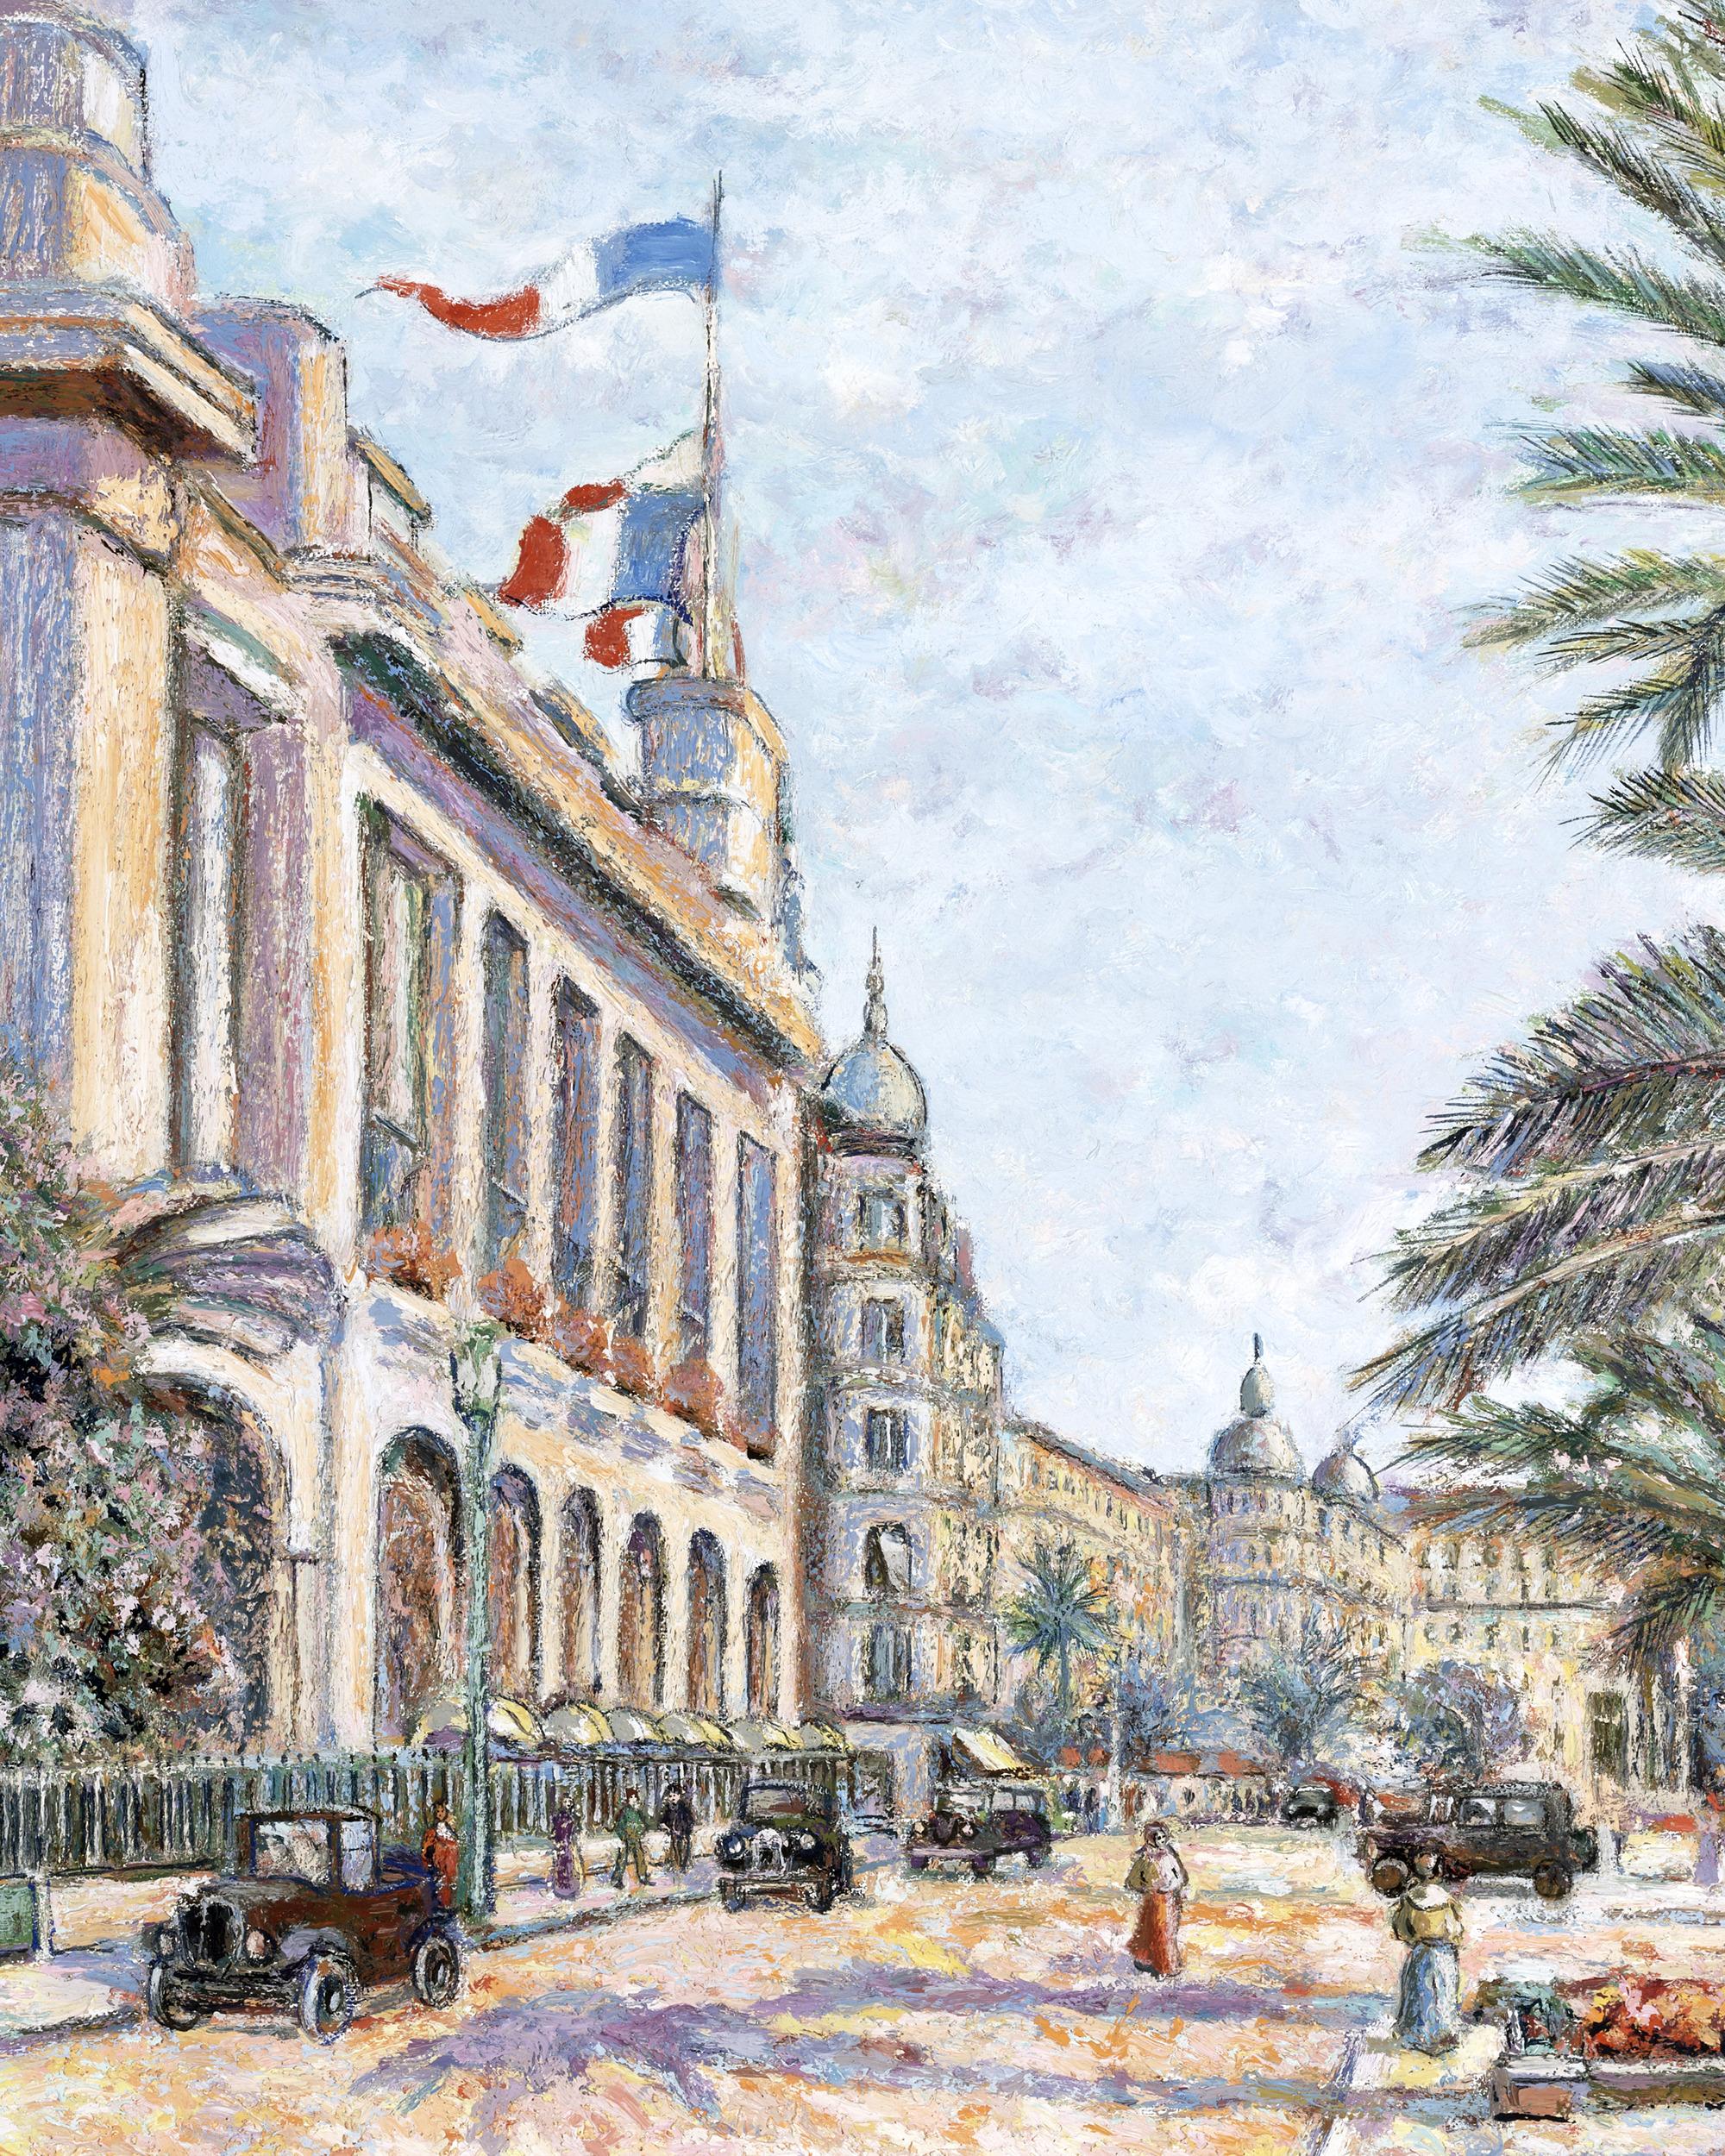 Palmiers à Nice (Palm Trees in Nice) - Post-Impressionist Painting by Hughes Claude Pissarro